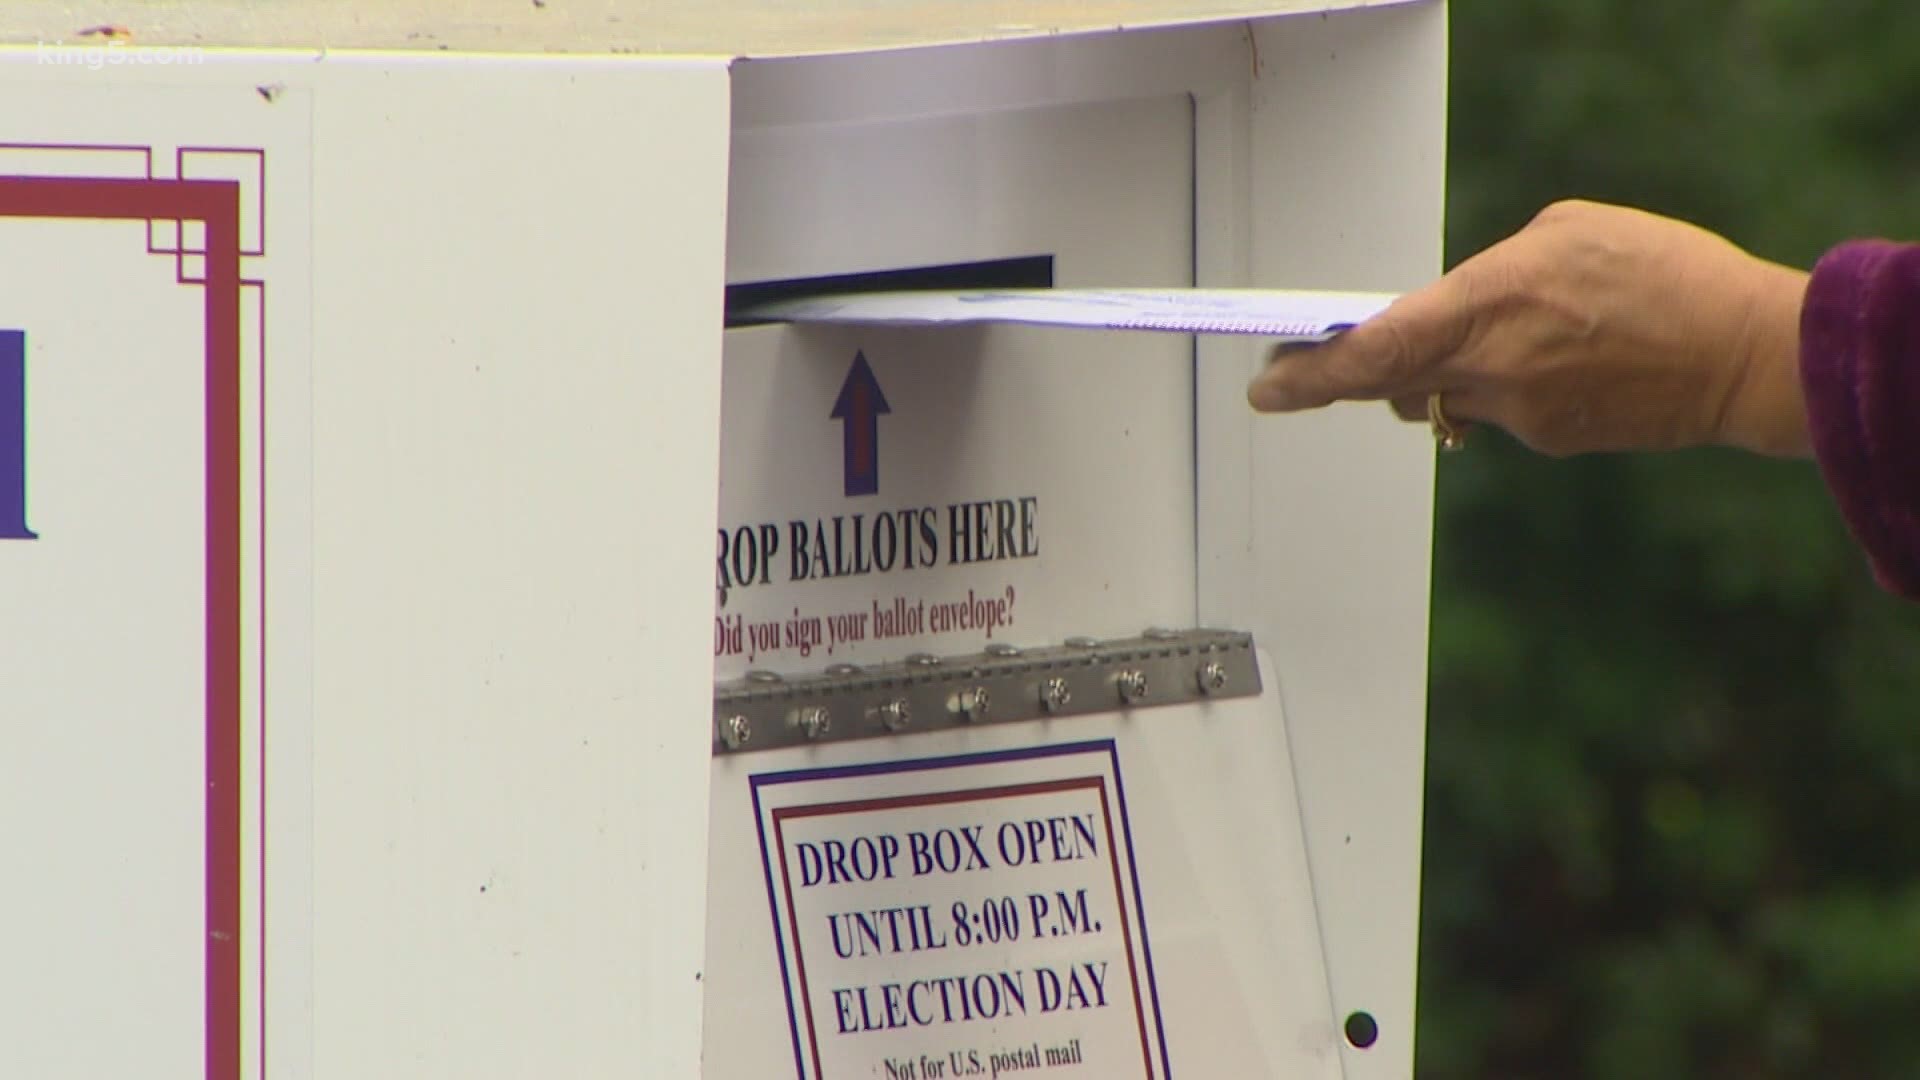 Six centers will be open to help people register to vote and cast their ballots.